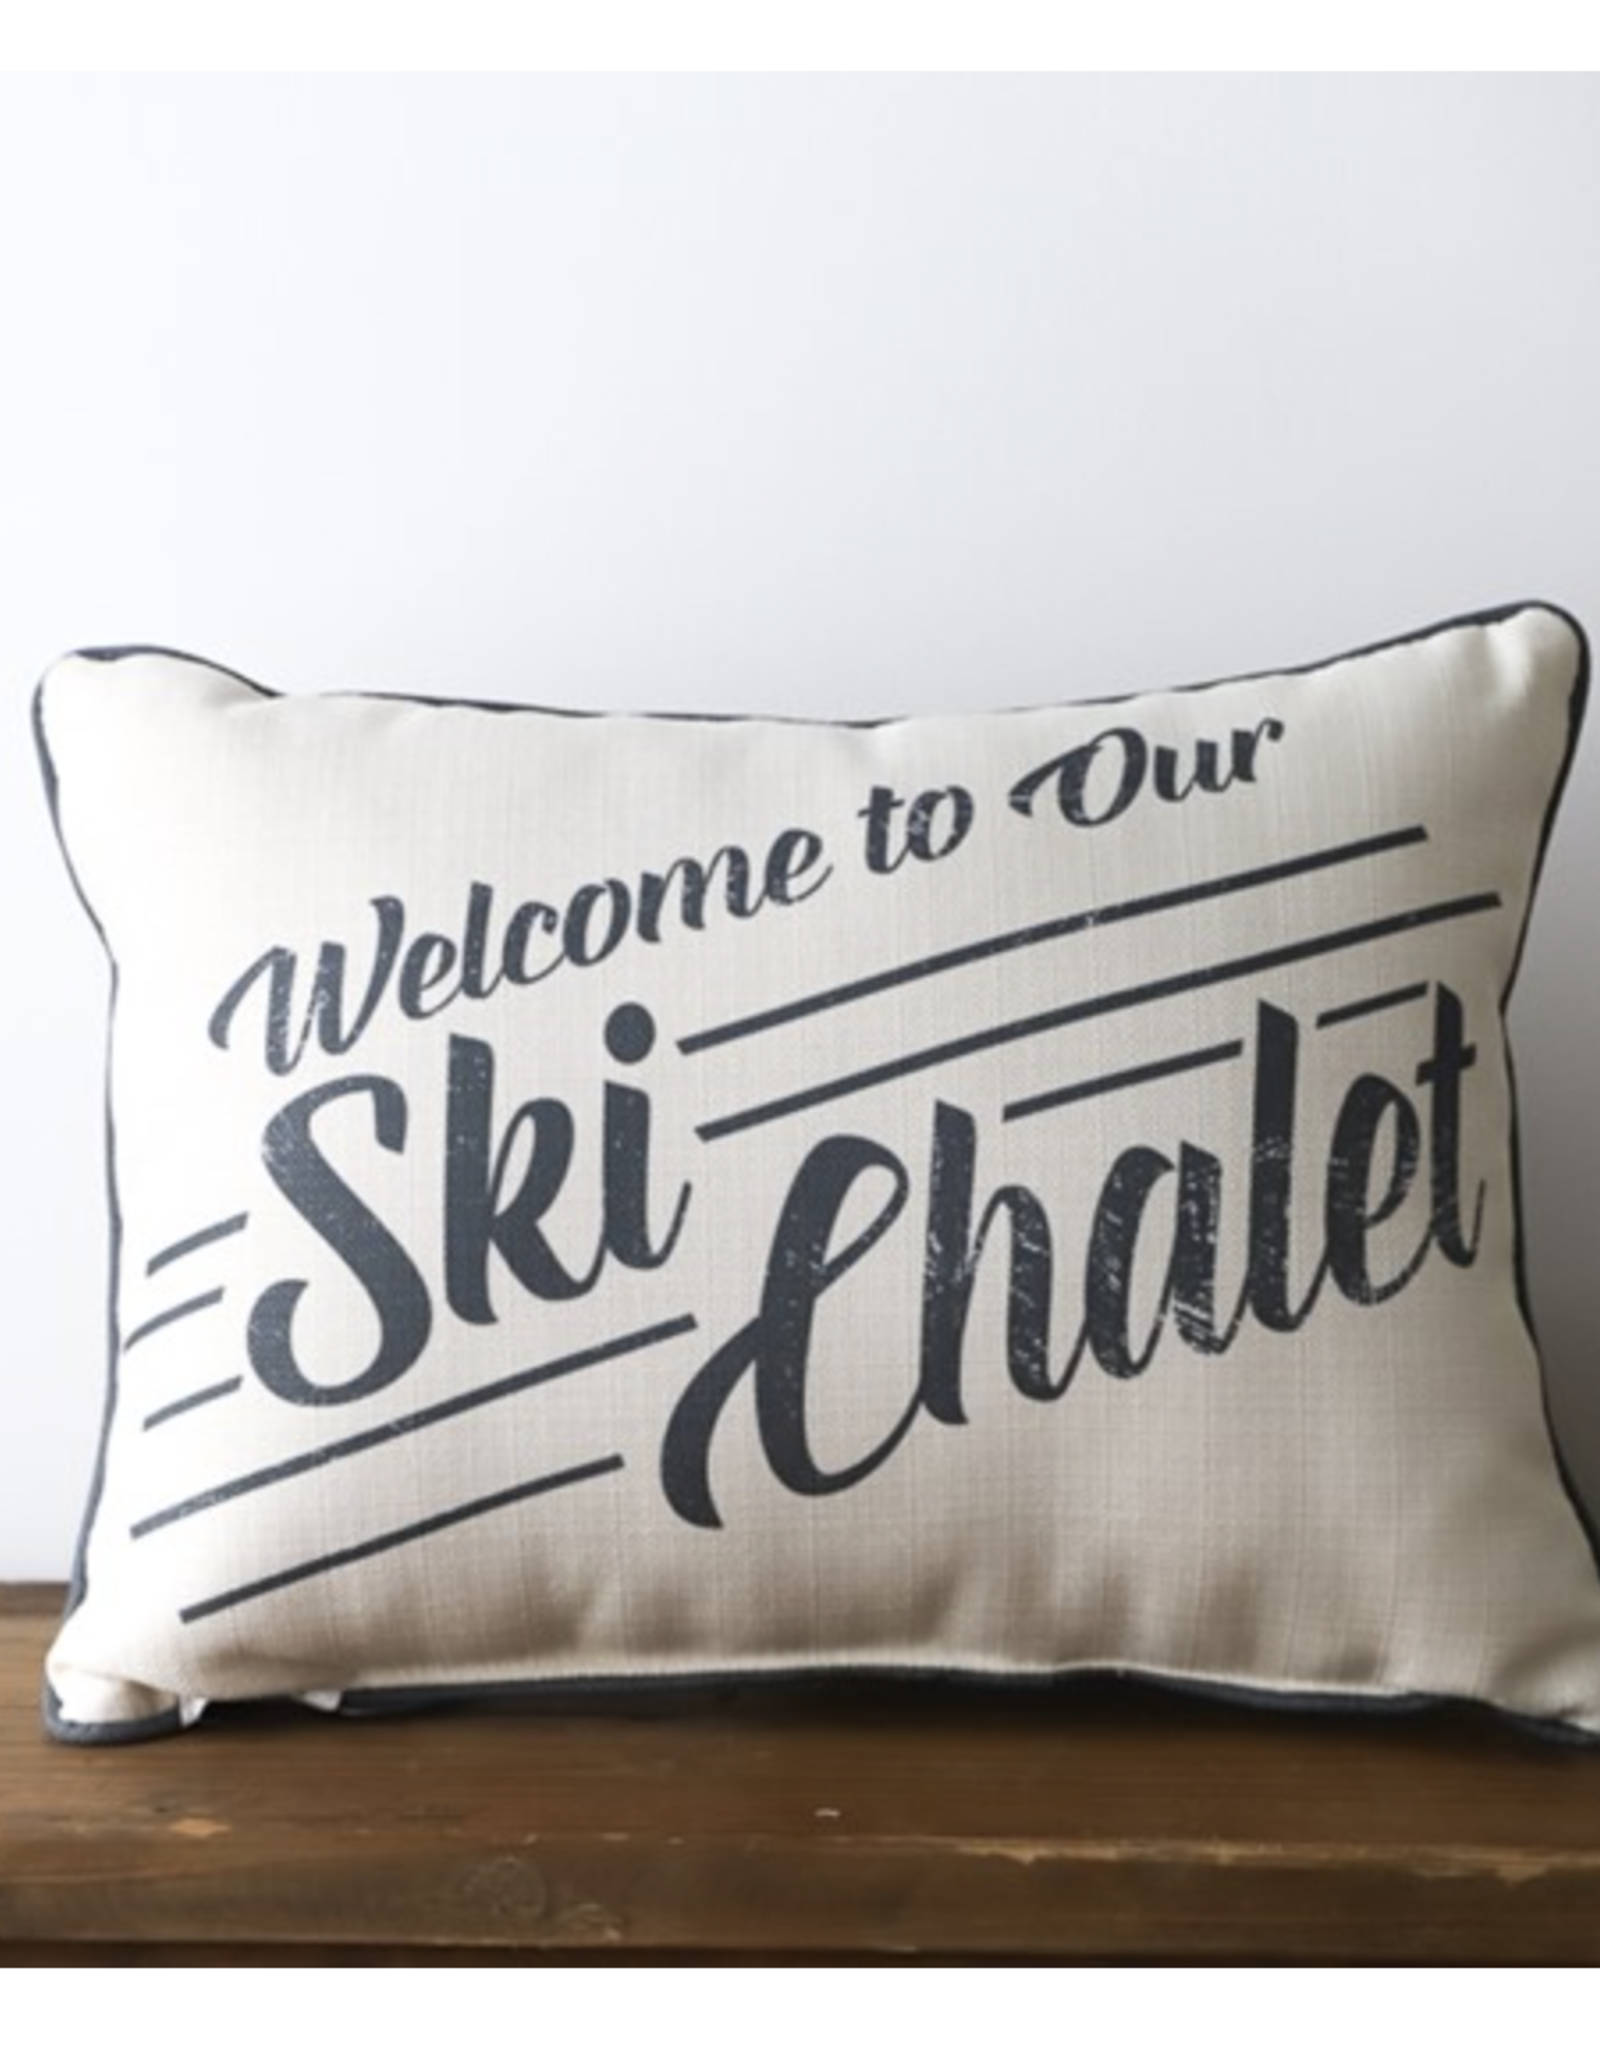 Welcome to our ski chalet pillow